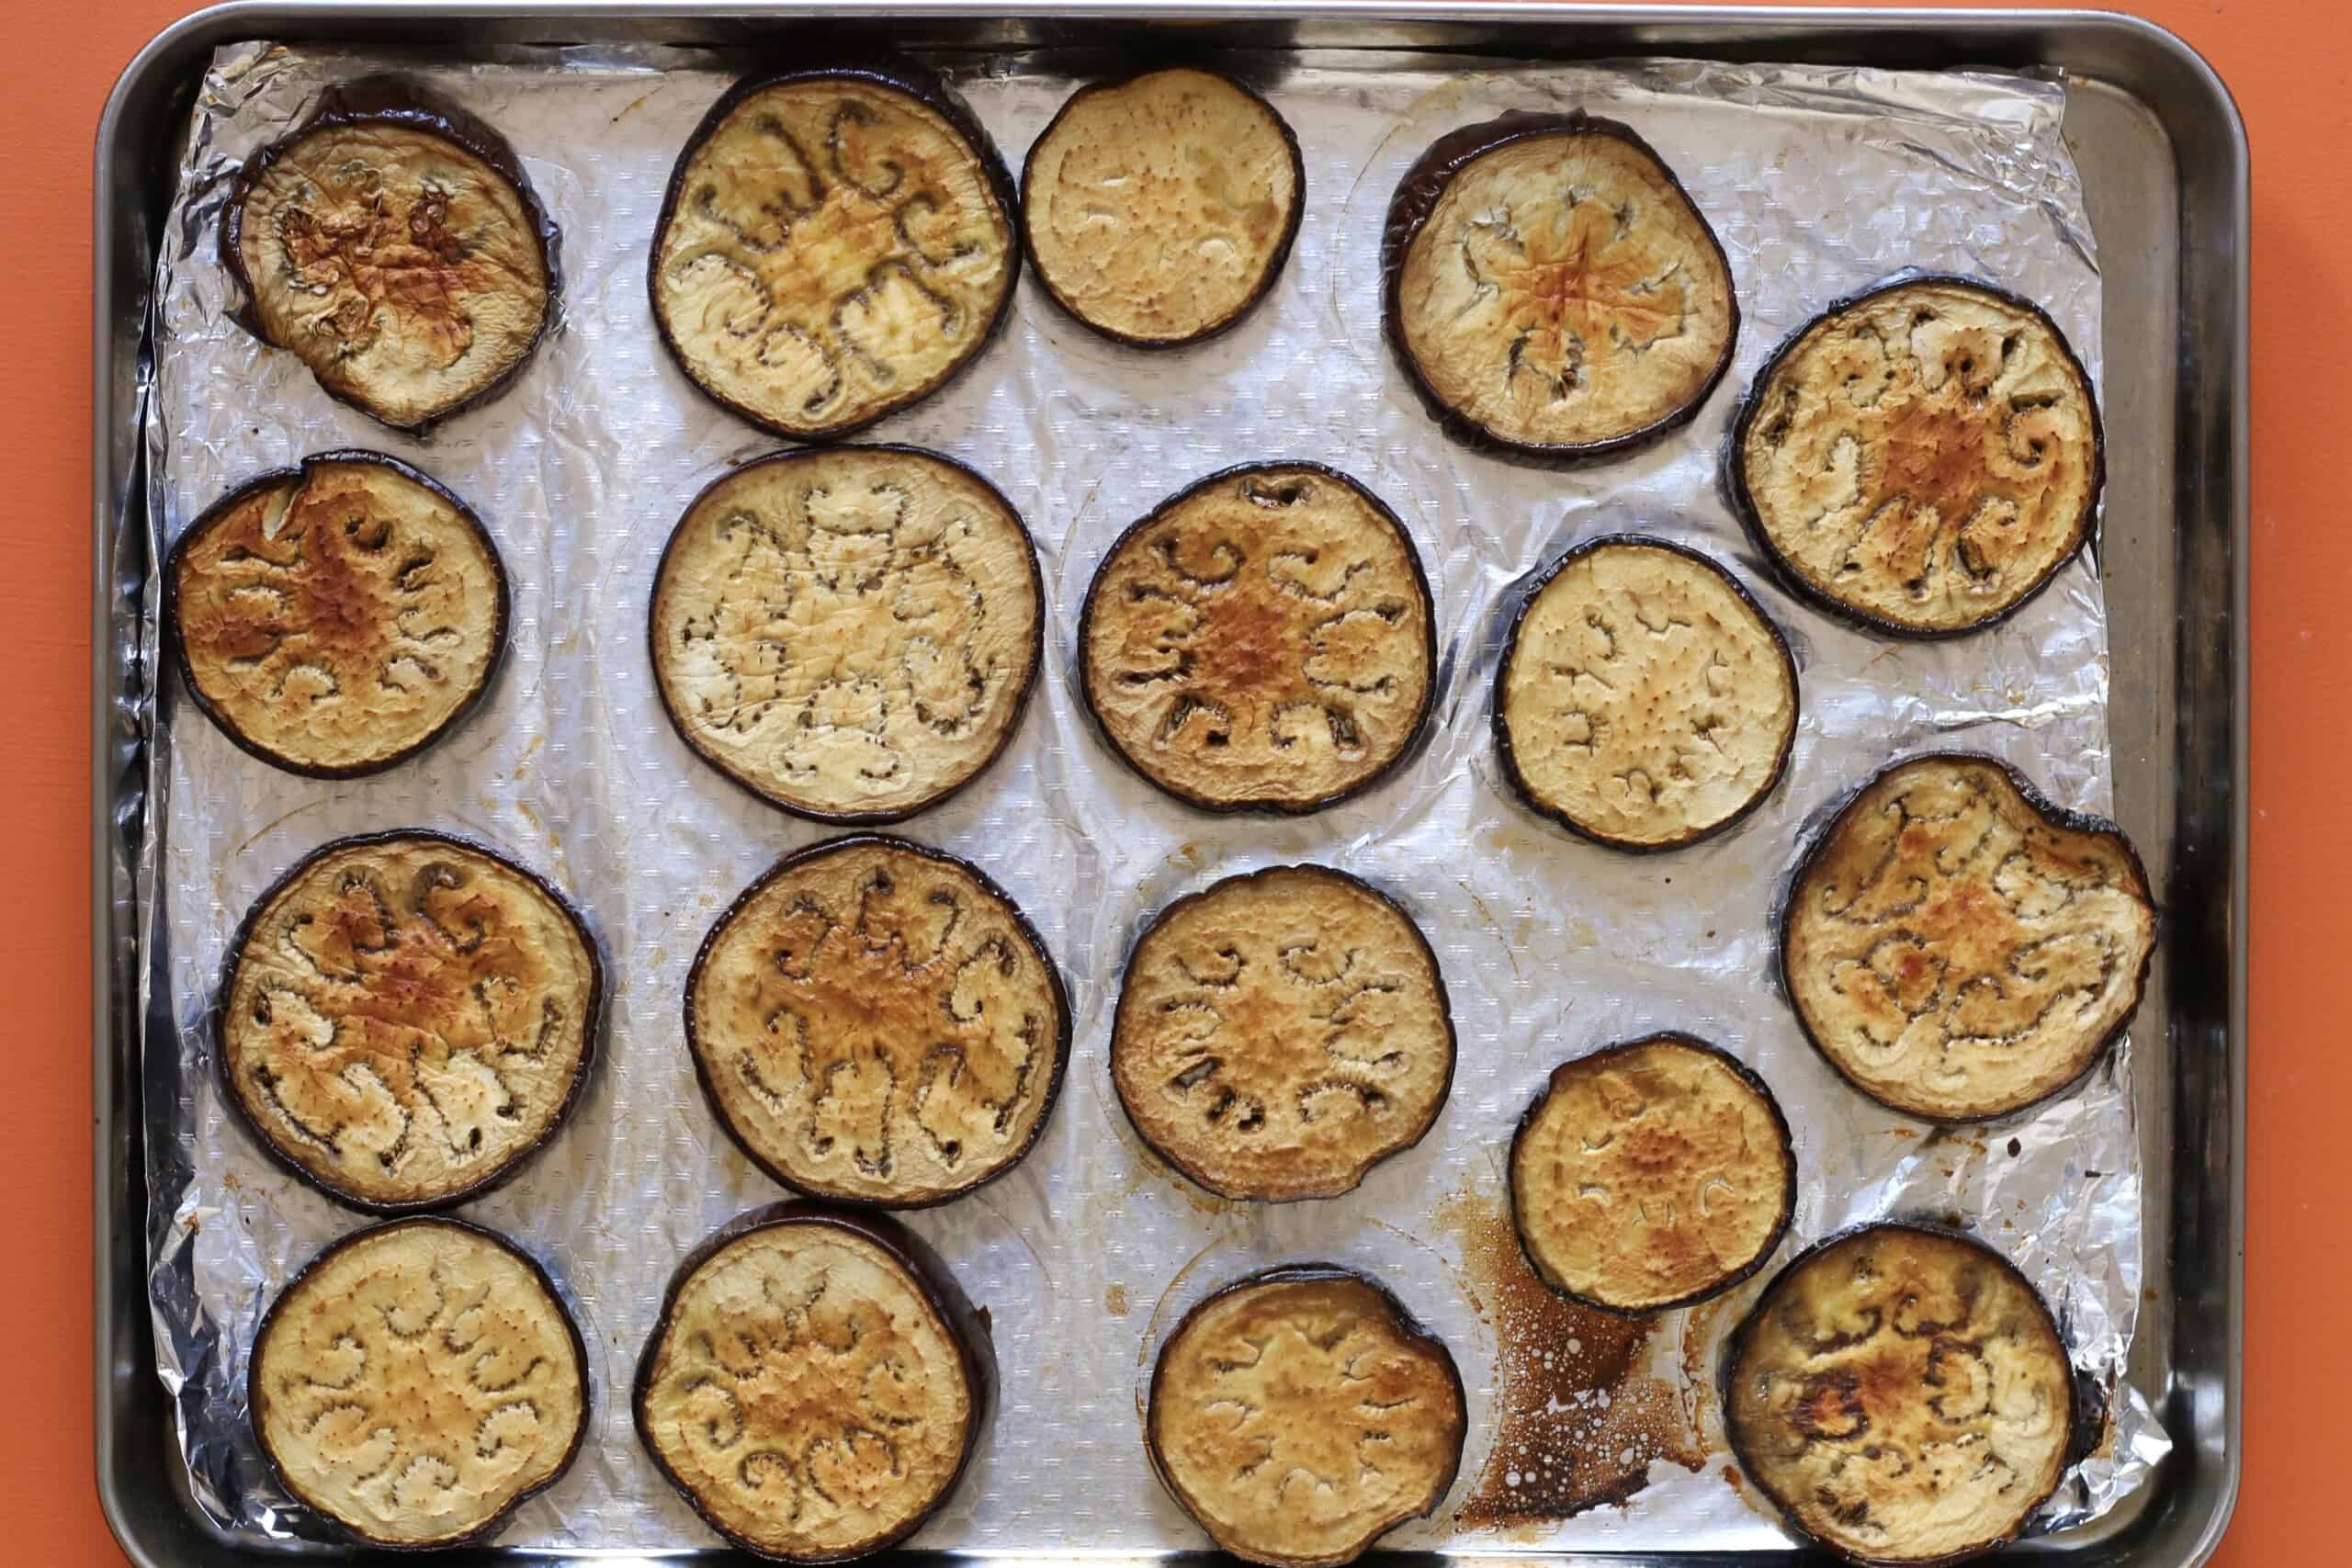 Roasted aubergines on foil lined baking tray